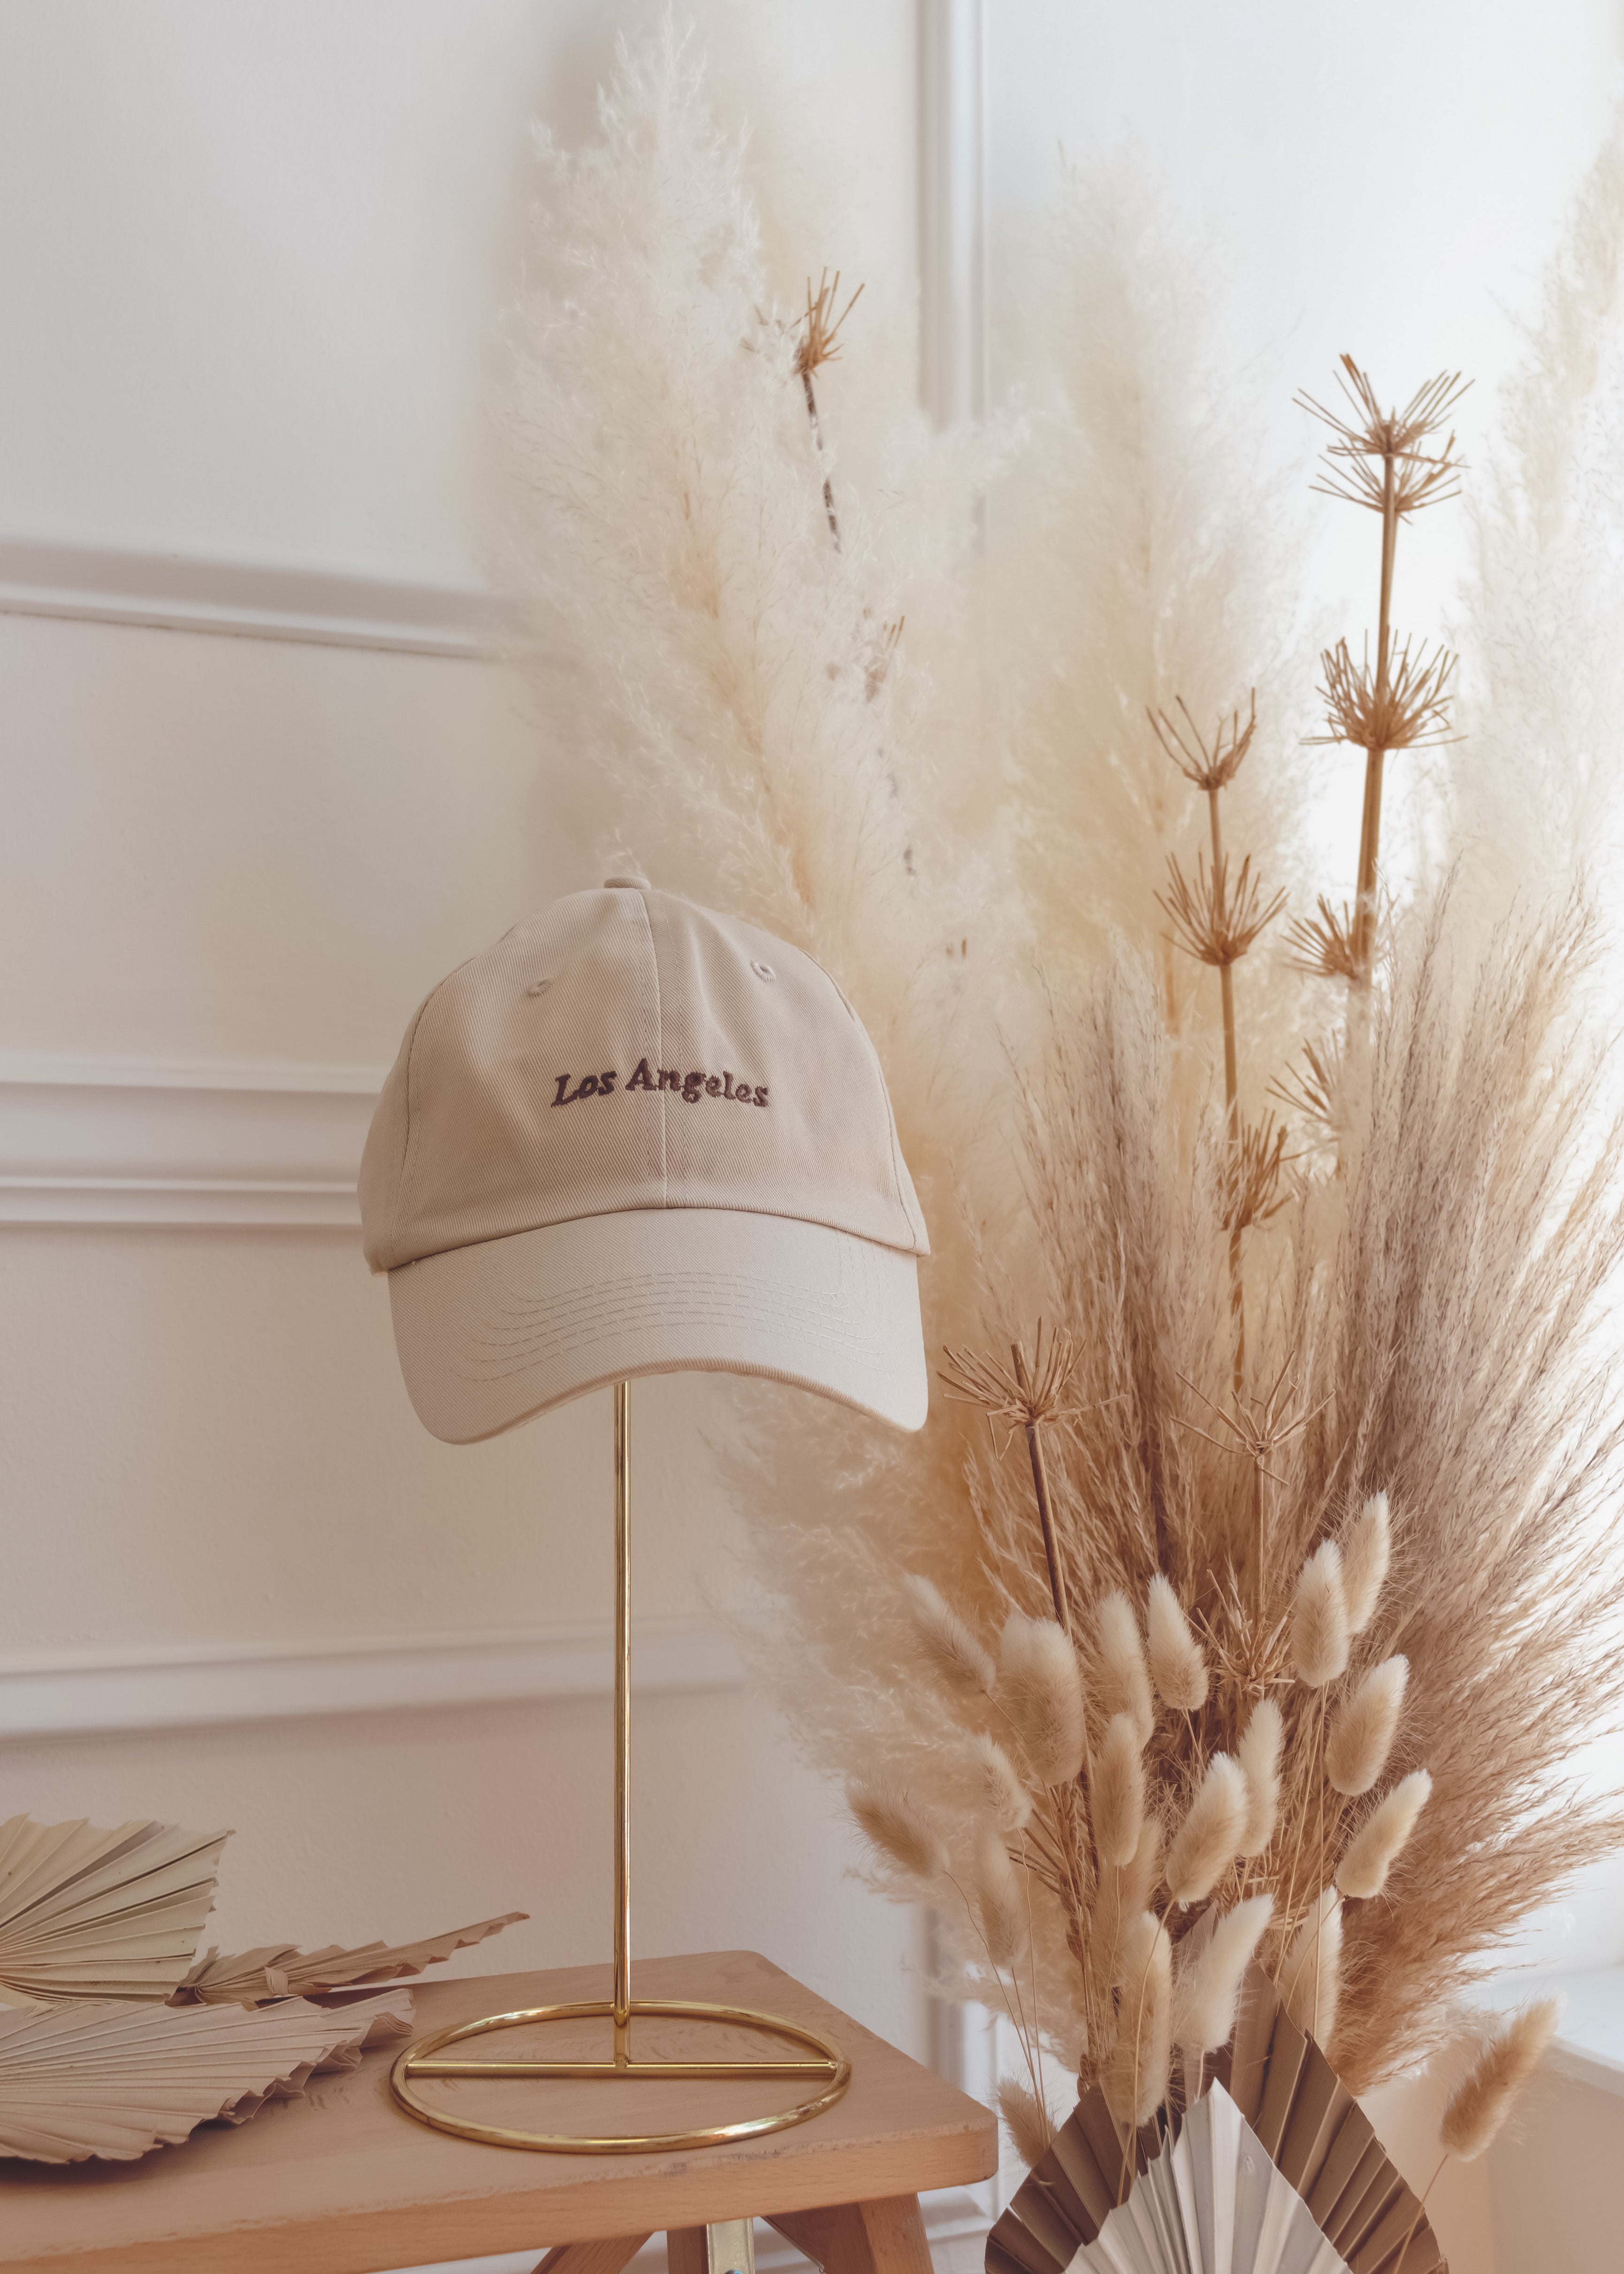 Los Angeles Beige Embroidered Baseball Cap